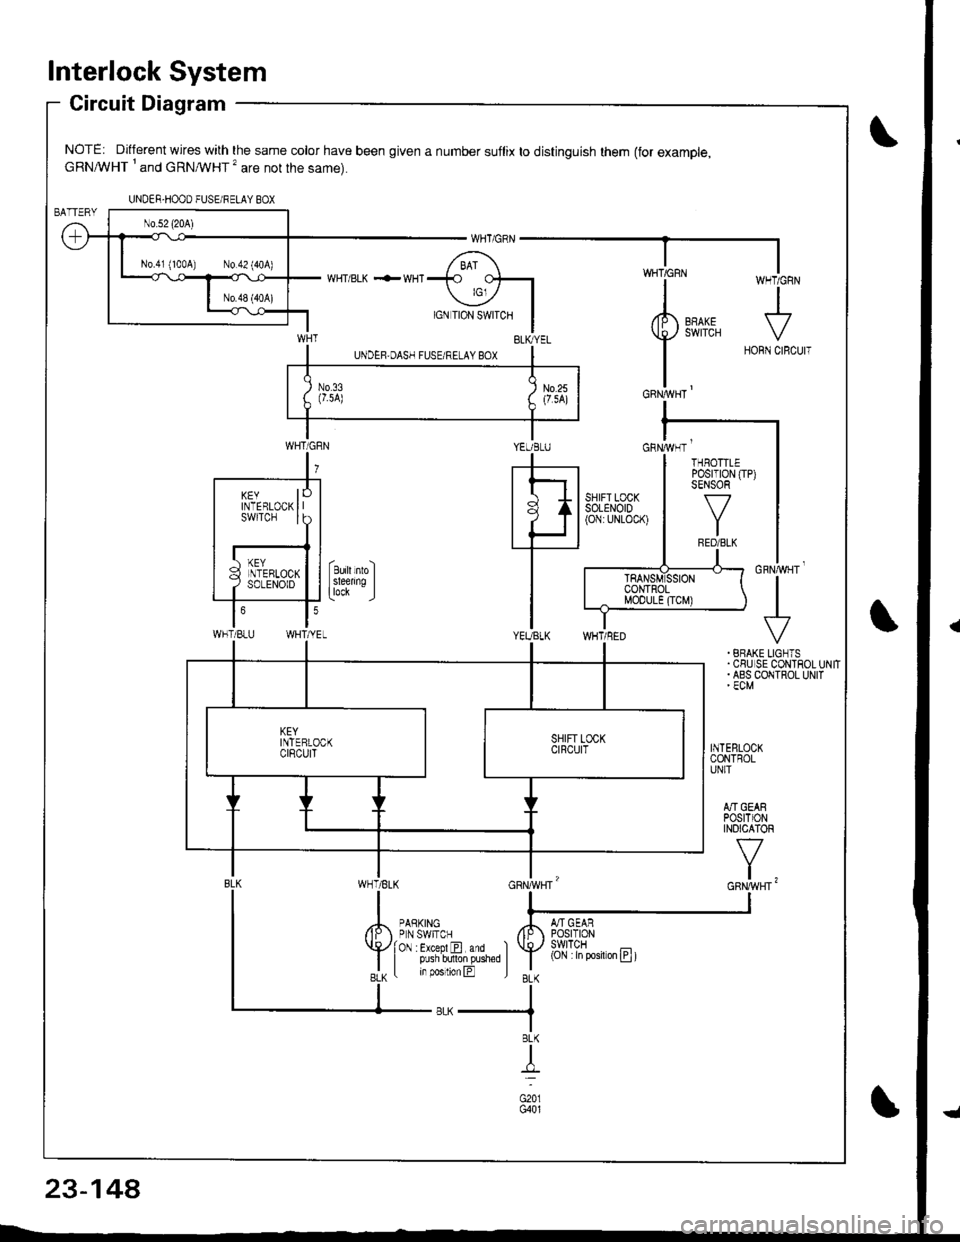 HONDA INTEGRA 1998 4.G Owners Manual lnterlock System
Circuit Diagram
NOTE: Different wires with the same color have been given a number suflix to distinguish them (for example,cRNA/VHT I and cRNMHT � are not the same).
WHT/ BLK .-- WHI